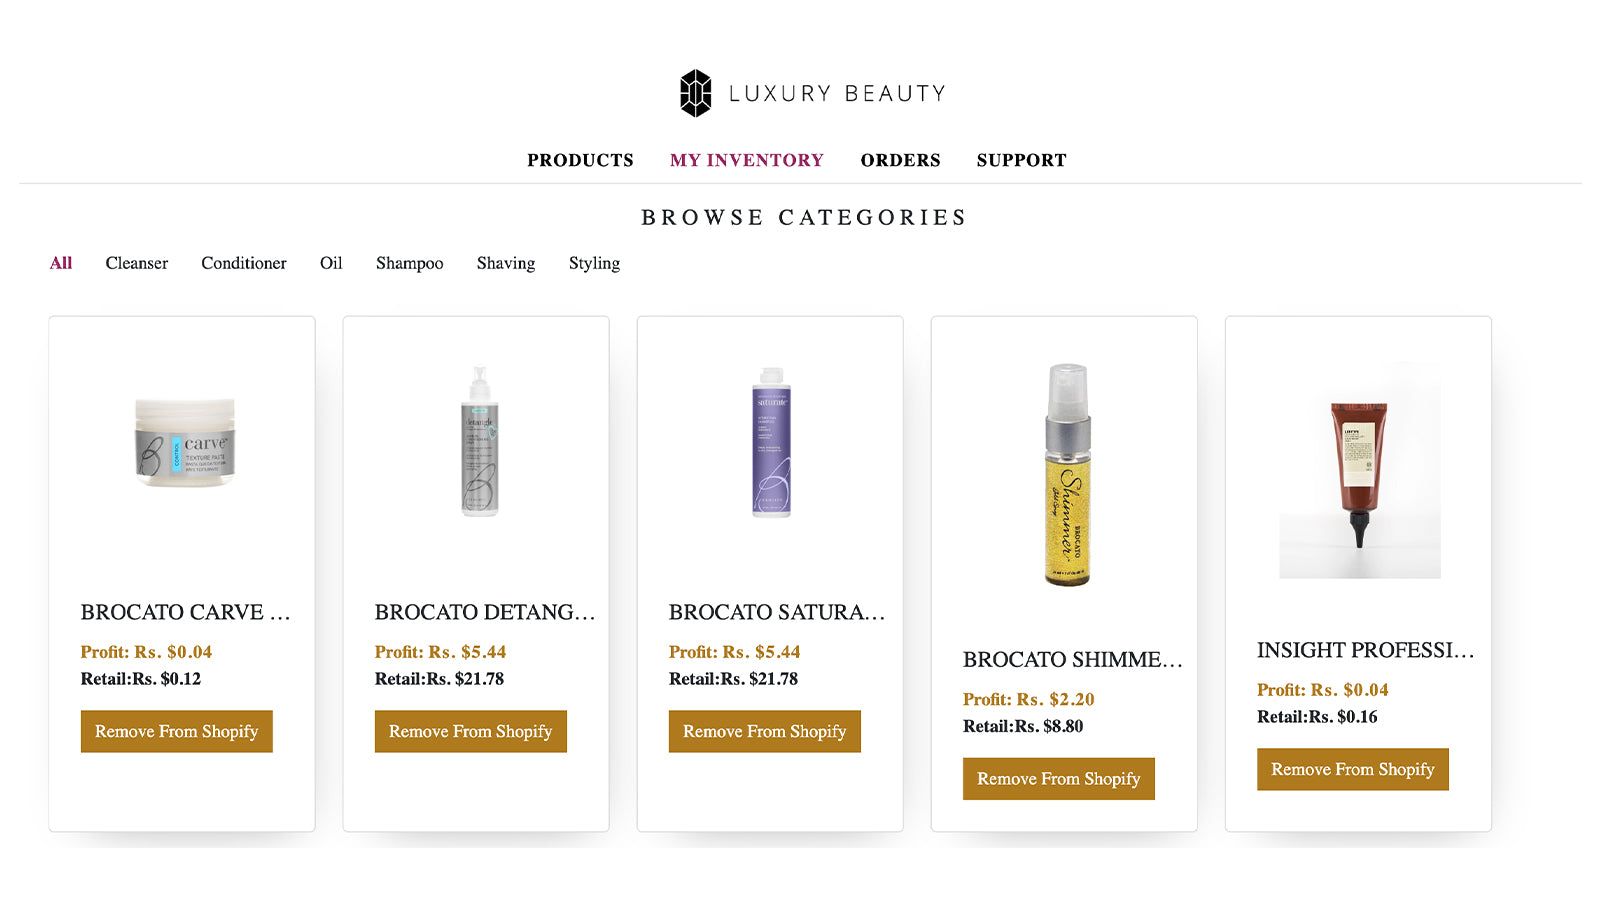 Luxury Beauty Inventory management